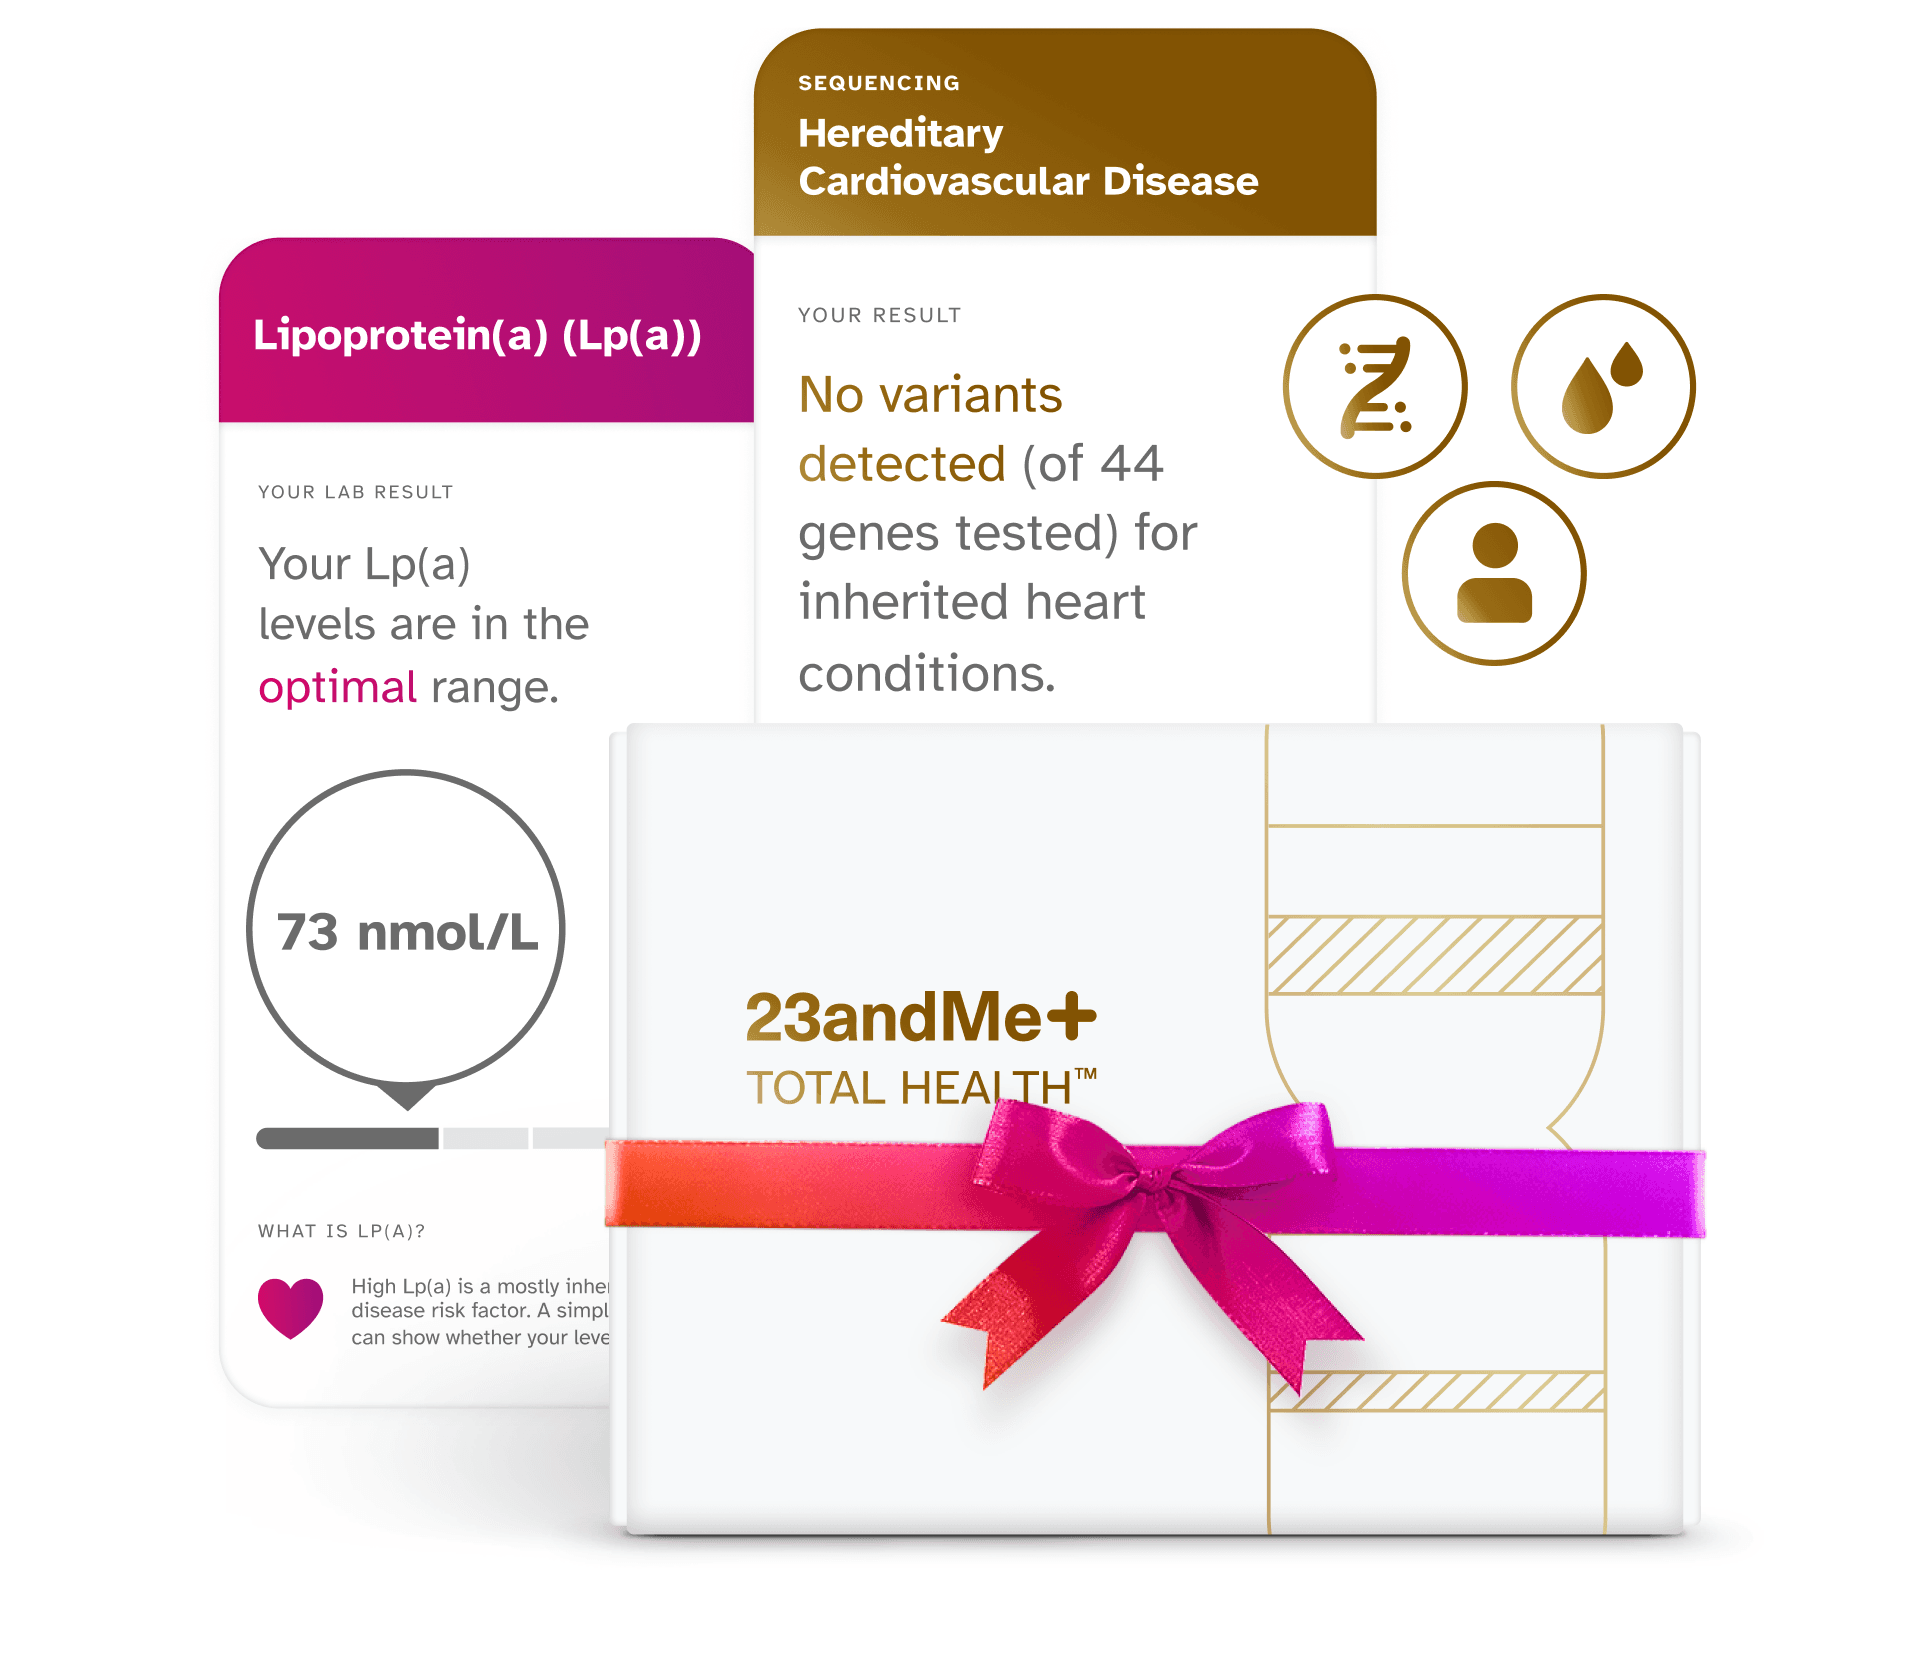 23andMe plus Total Health saliva collection Kit with example reports Lipoprotein(a) (Lp(a)) and Sequencing - Hereditary Cardiovascular Disease. Lipoprotein(a) (Lp(a)) report displays an example lab result: Your Lp(a) levels are in the optimal range. What is Lp(a)? High Lp(a) is a mostly inherited heart disease risk factor. A simple blood test can show whether your level is high. Sequencing - Hereditary Cardiovascular Disease report displays an example result: No variants detected (of 44 genes tested) for inherited heart conditions.